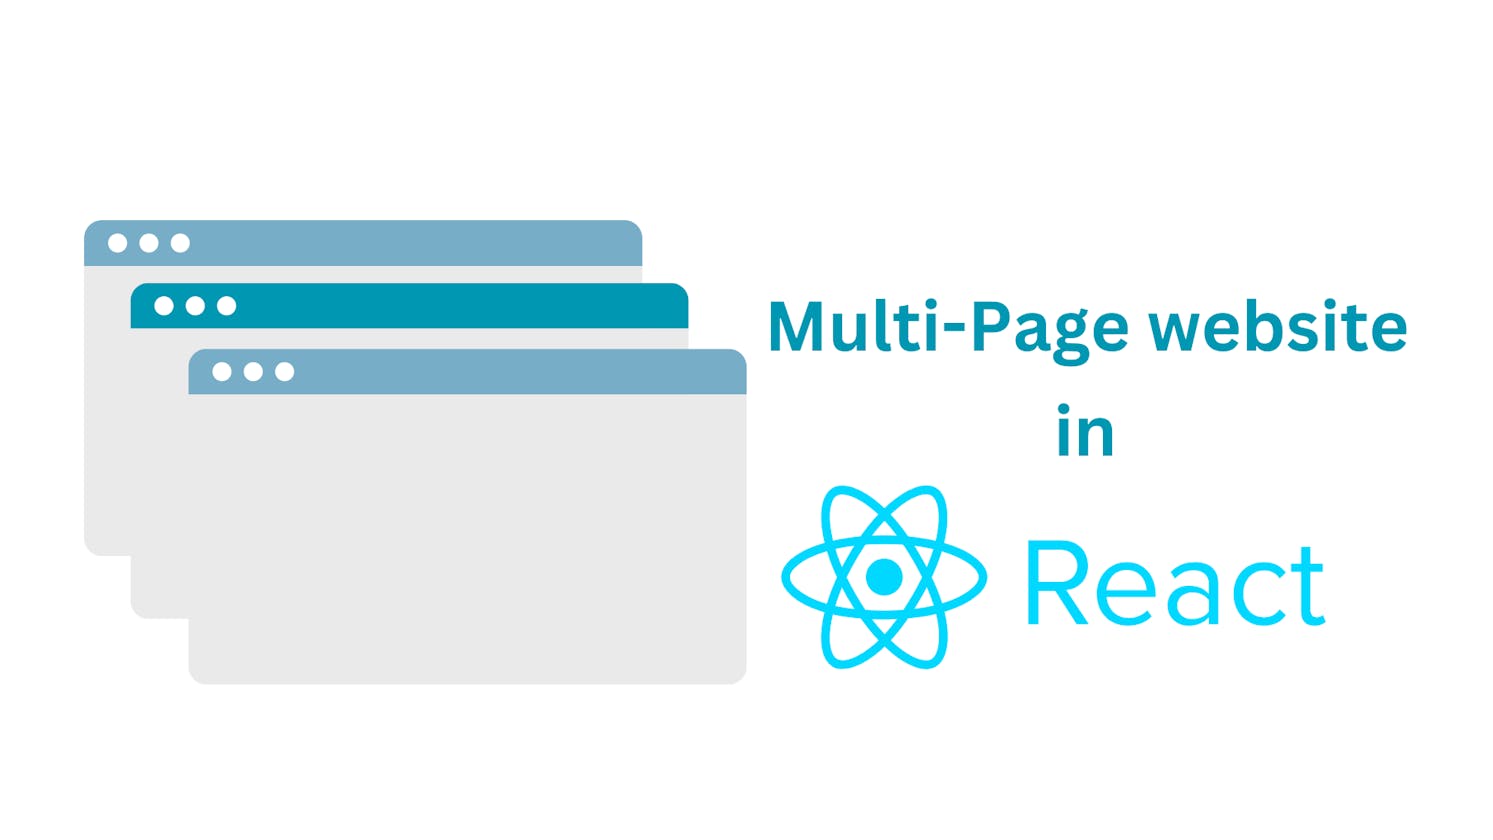 How to create a multi-page website in React ?